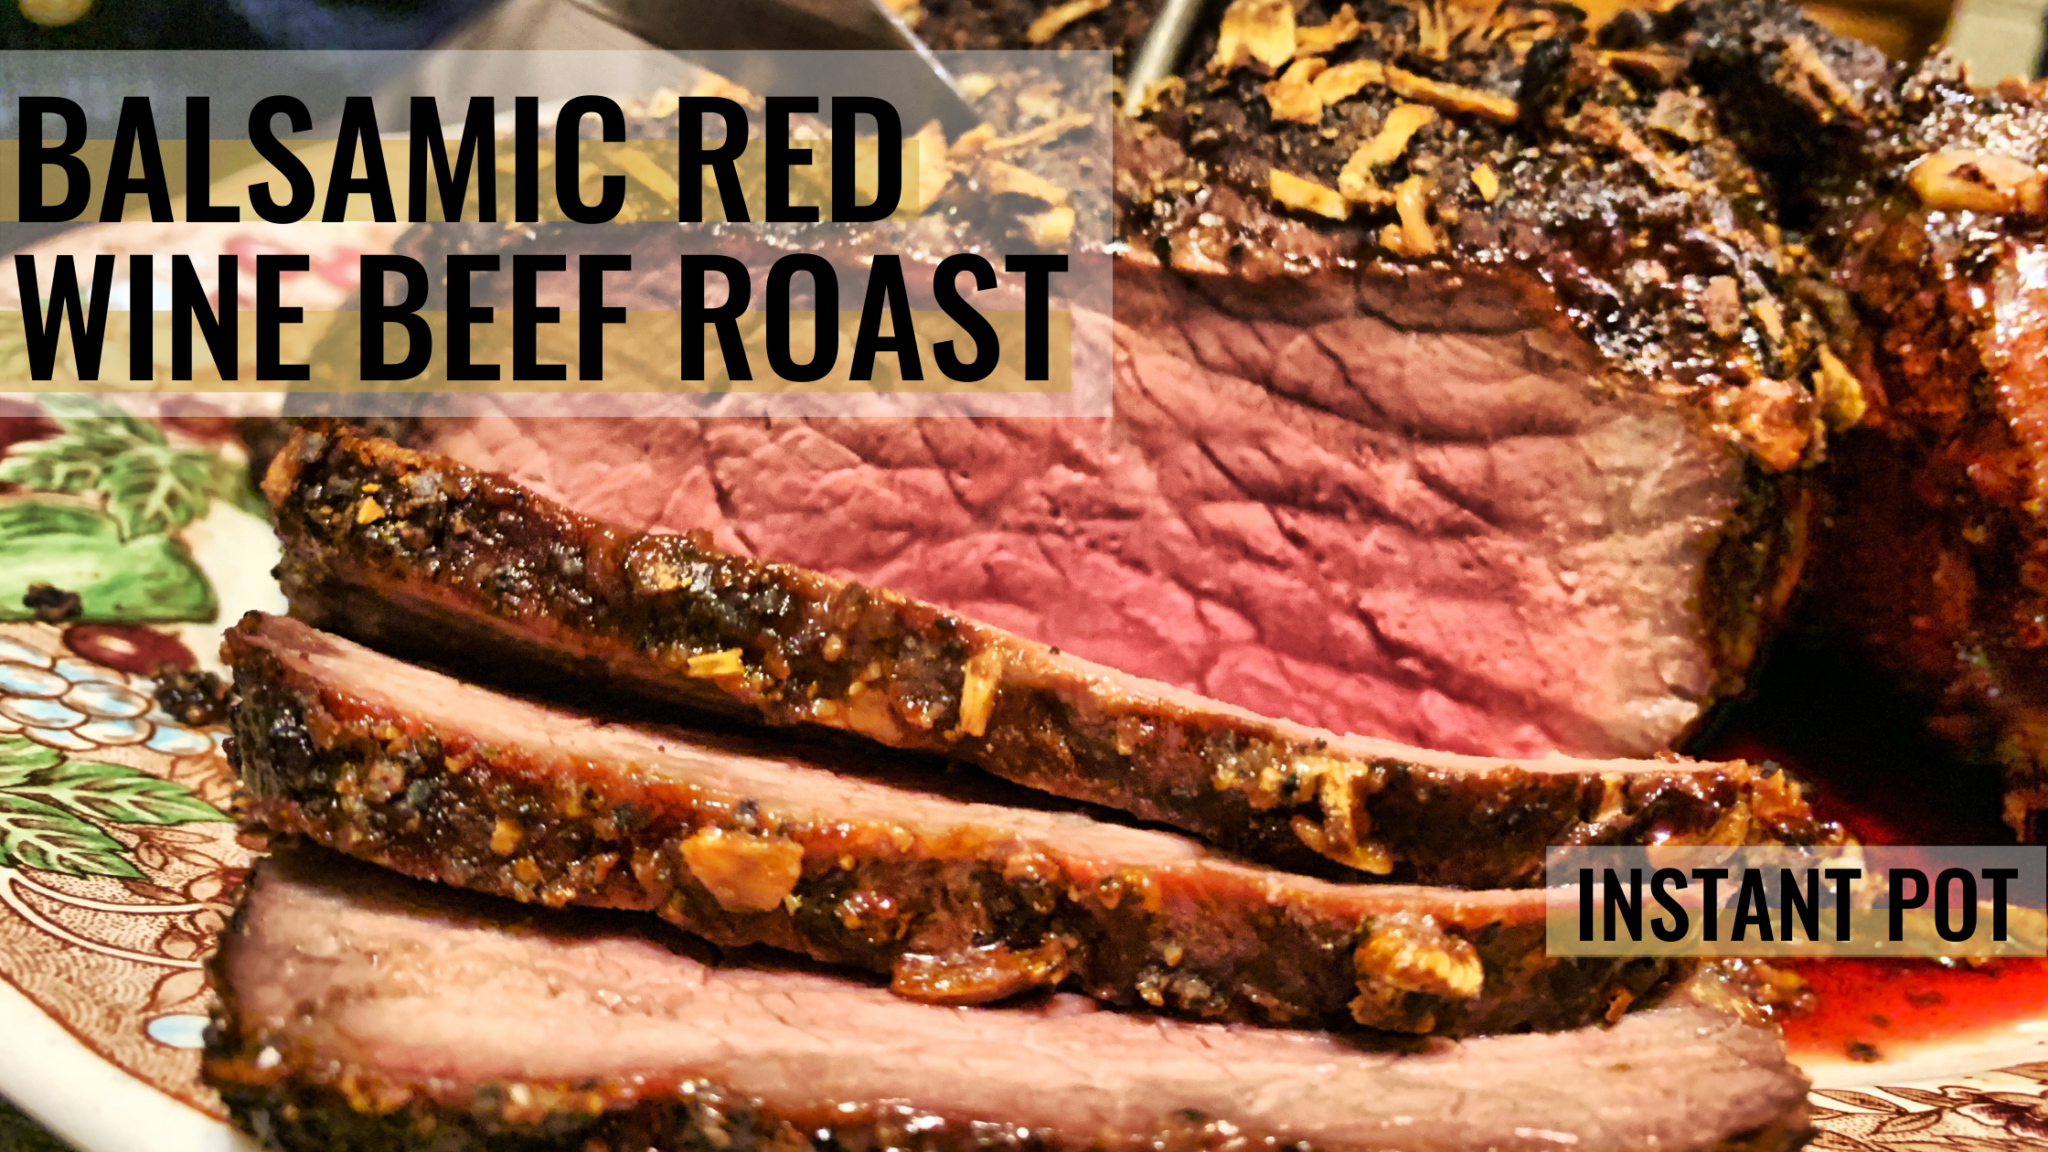 Beef Roast Made With Red Wine in the Instant Pot